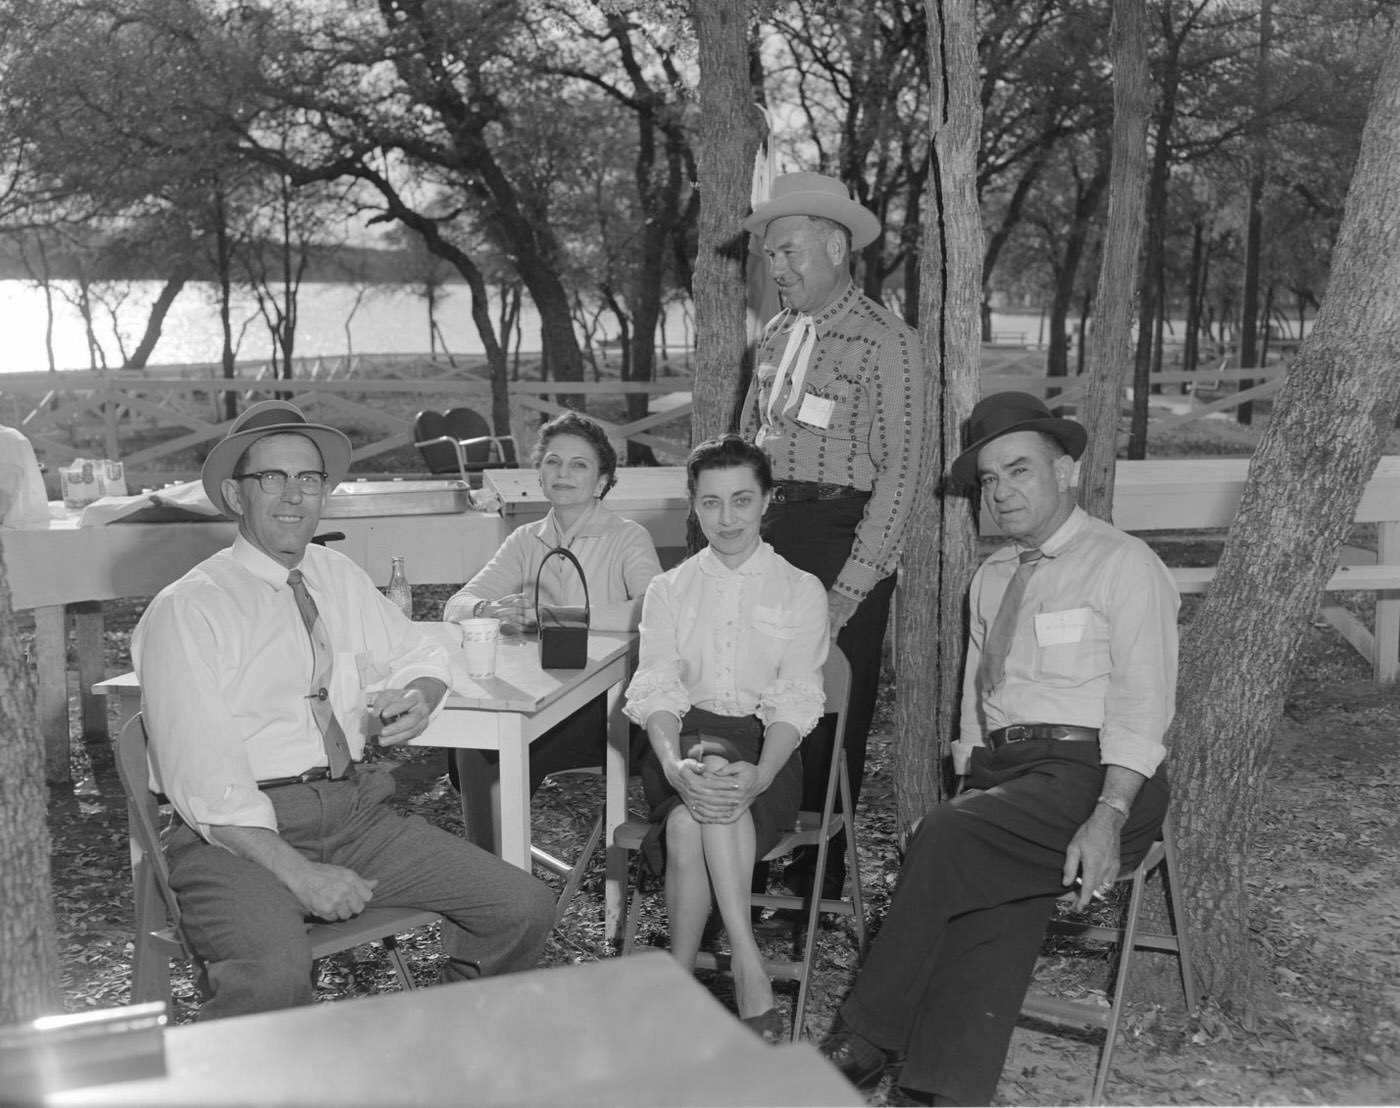 Lago Vista Open House BBQ with Guests Seated Outdoors, 1958.